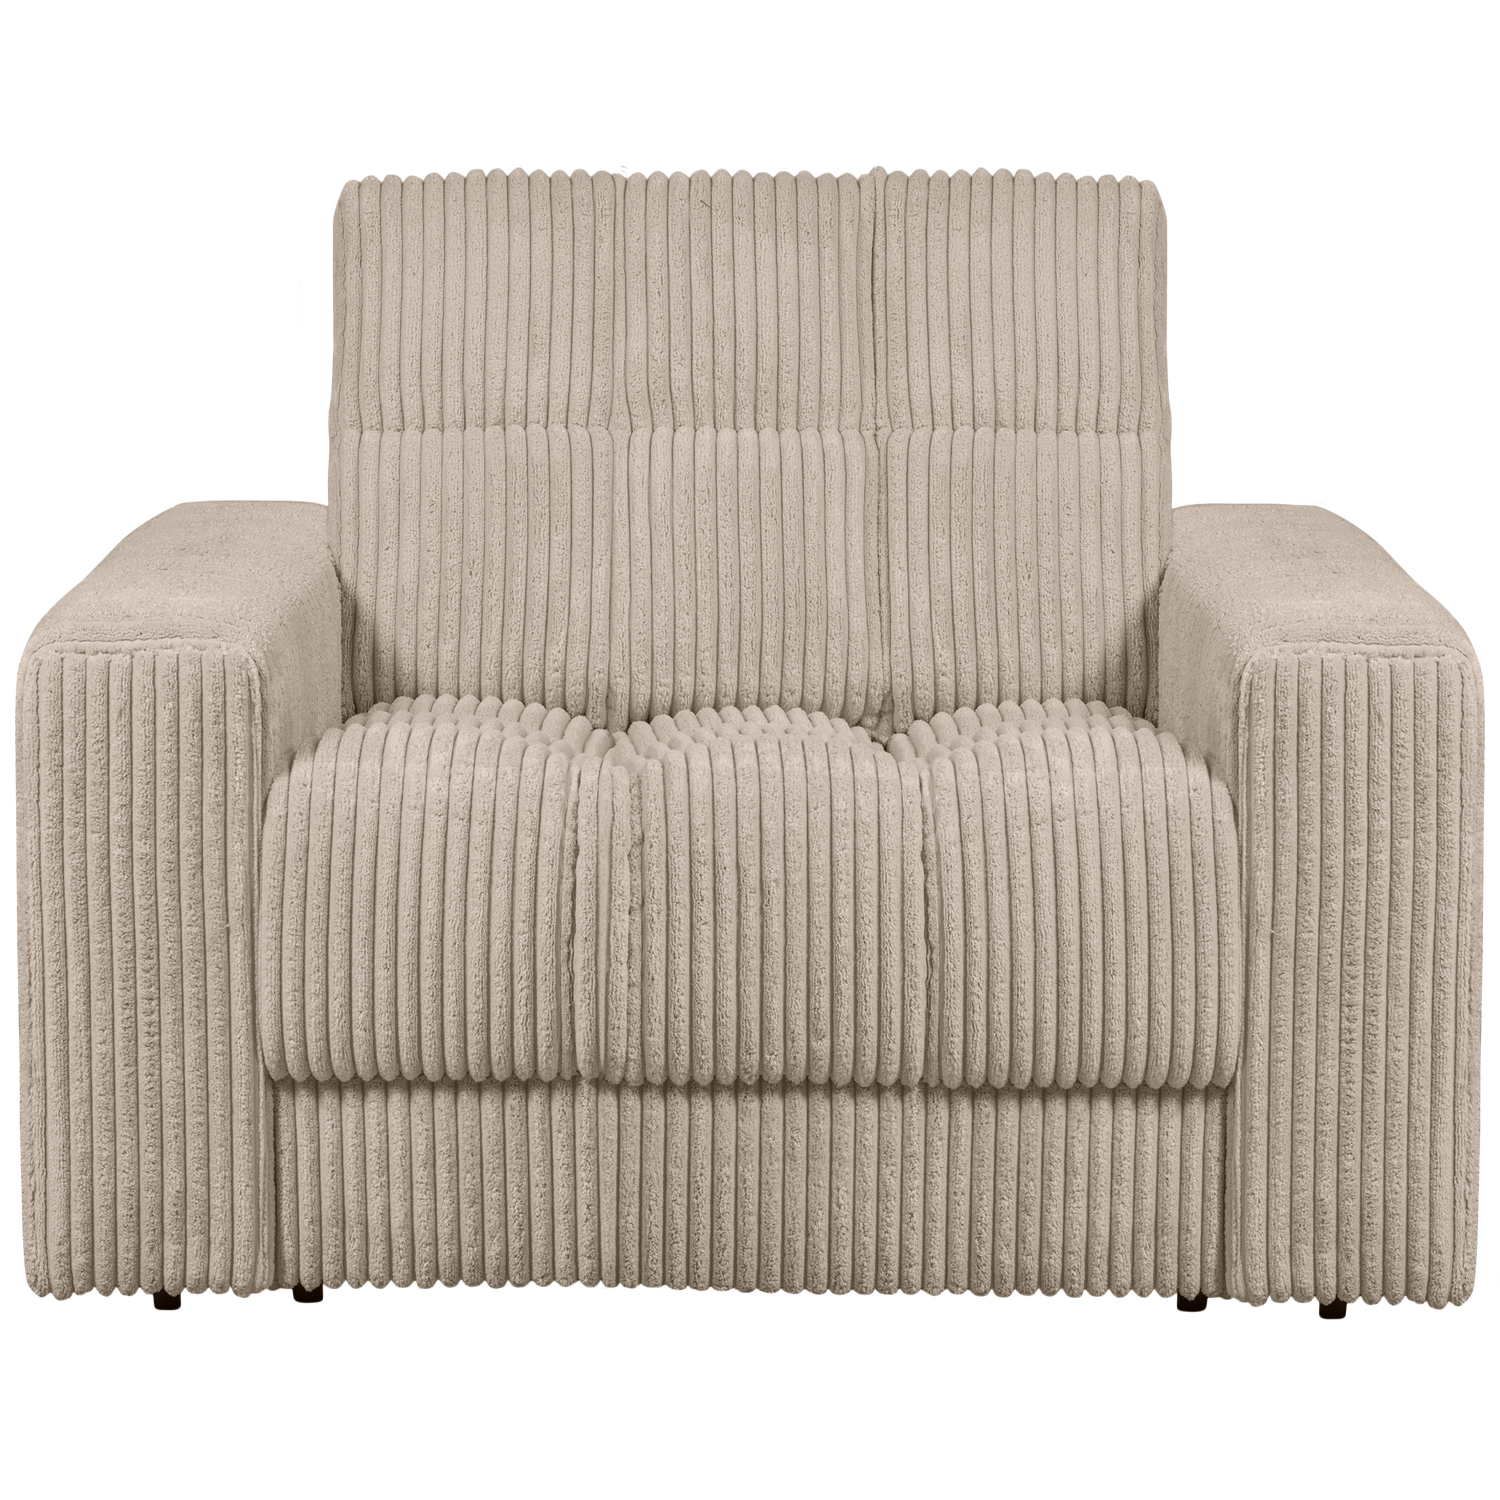 WOOOD Second date fauteuil grove ribstof travertin Beige|Taupe Fauteuil